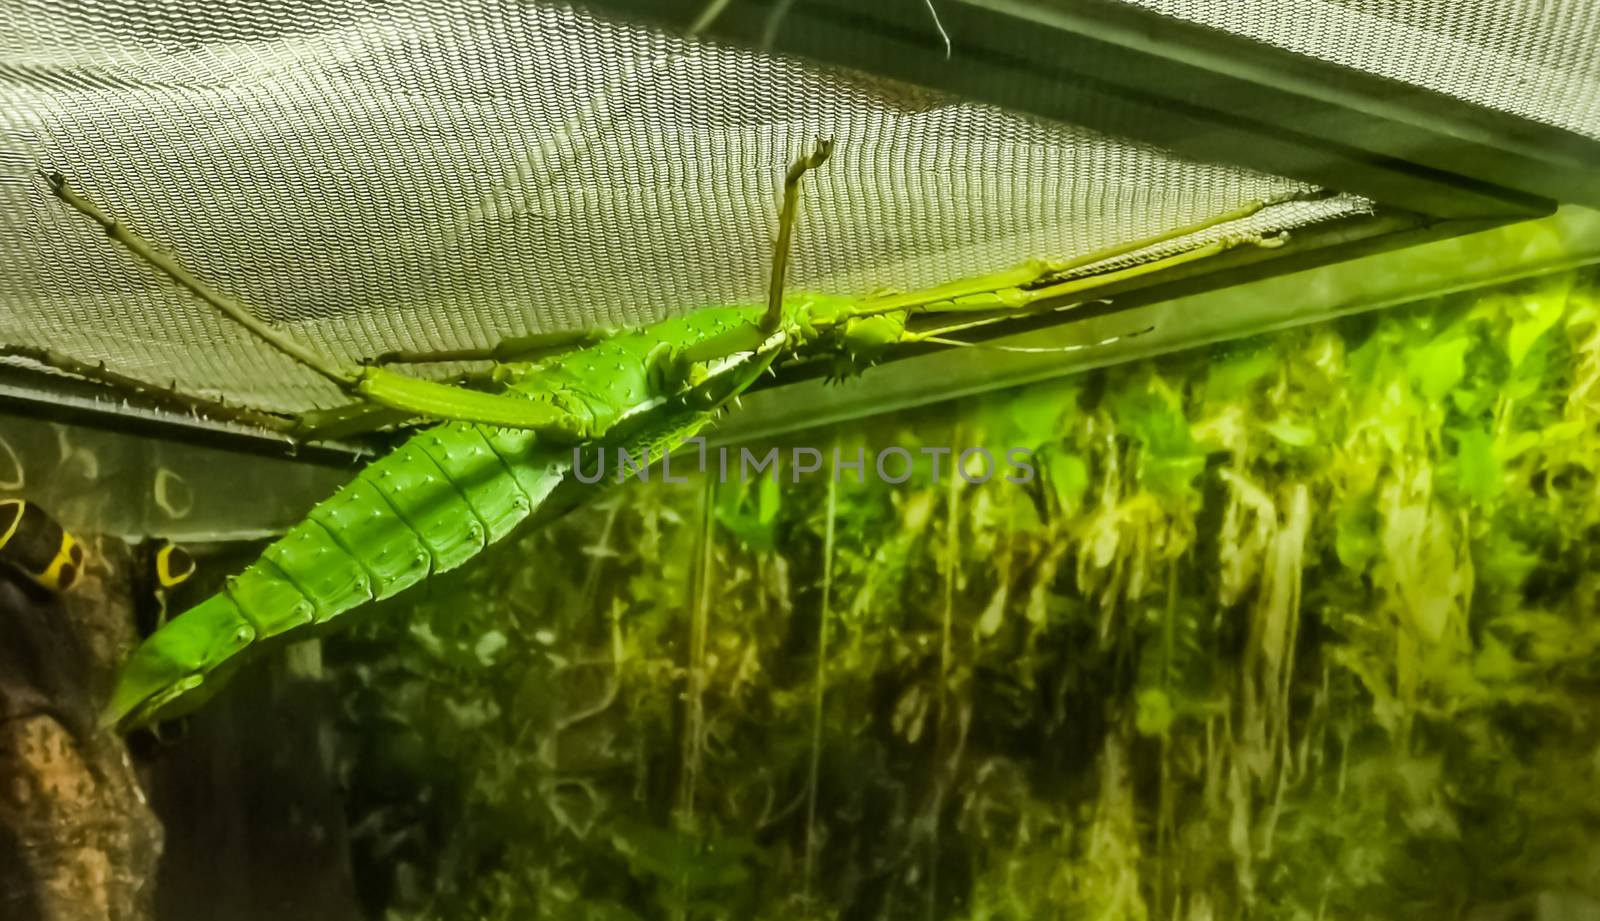 green female malayan jungle nymph in closeup, walking stick insect specie from Asia